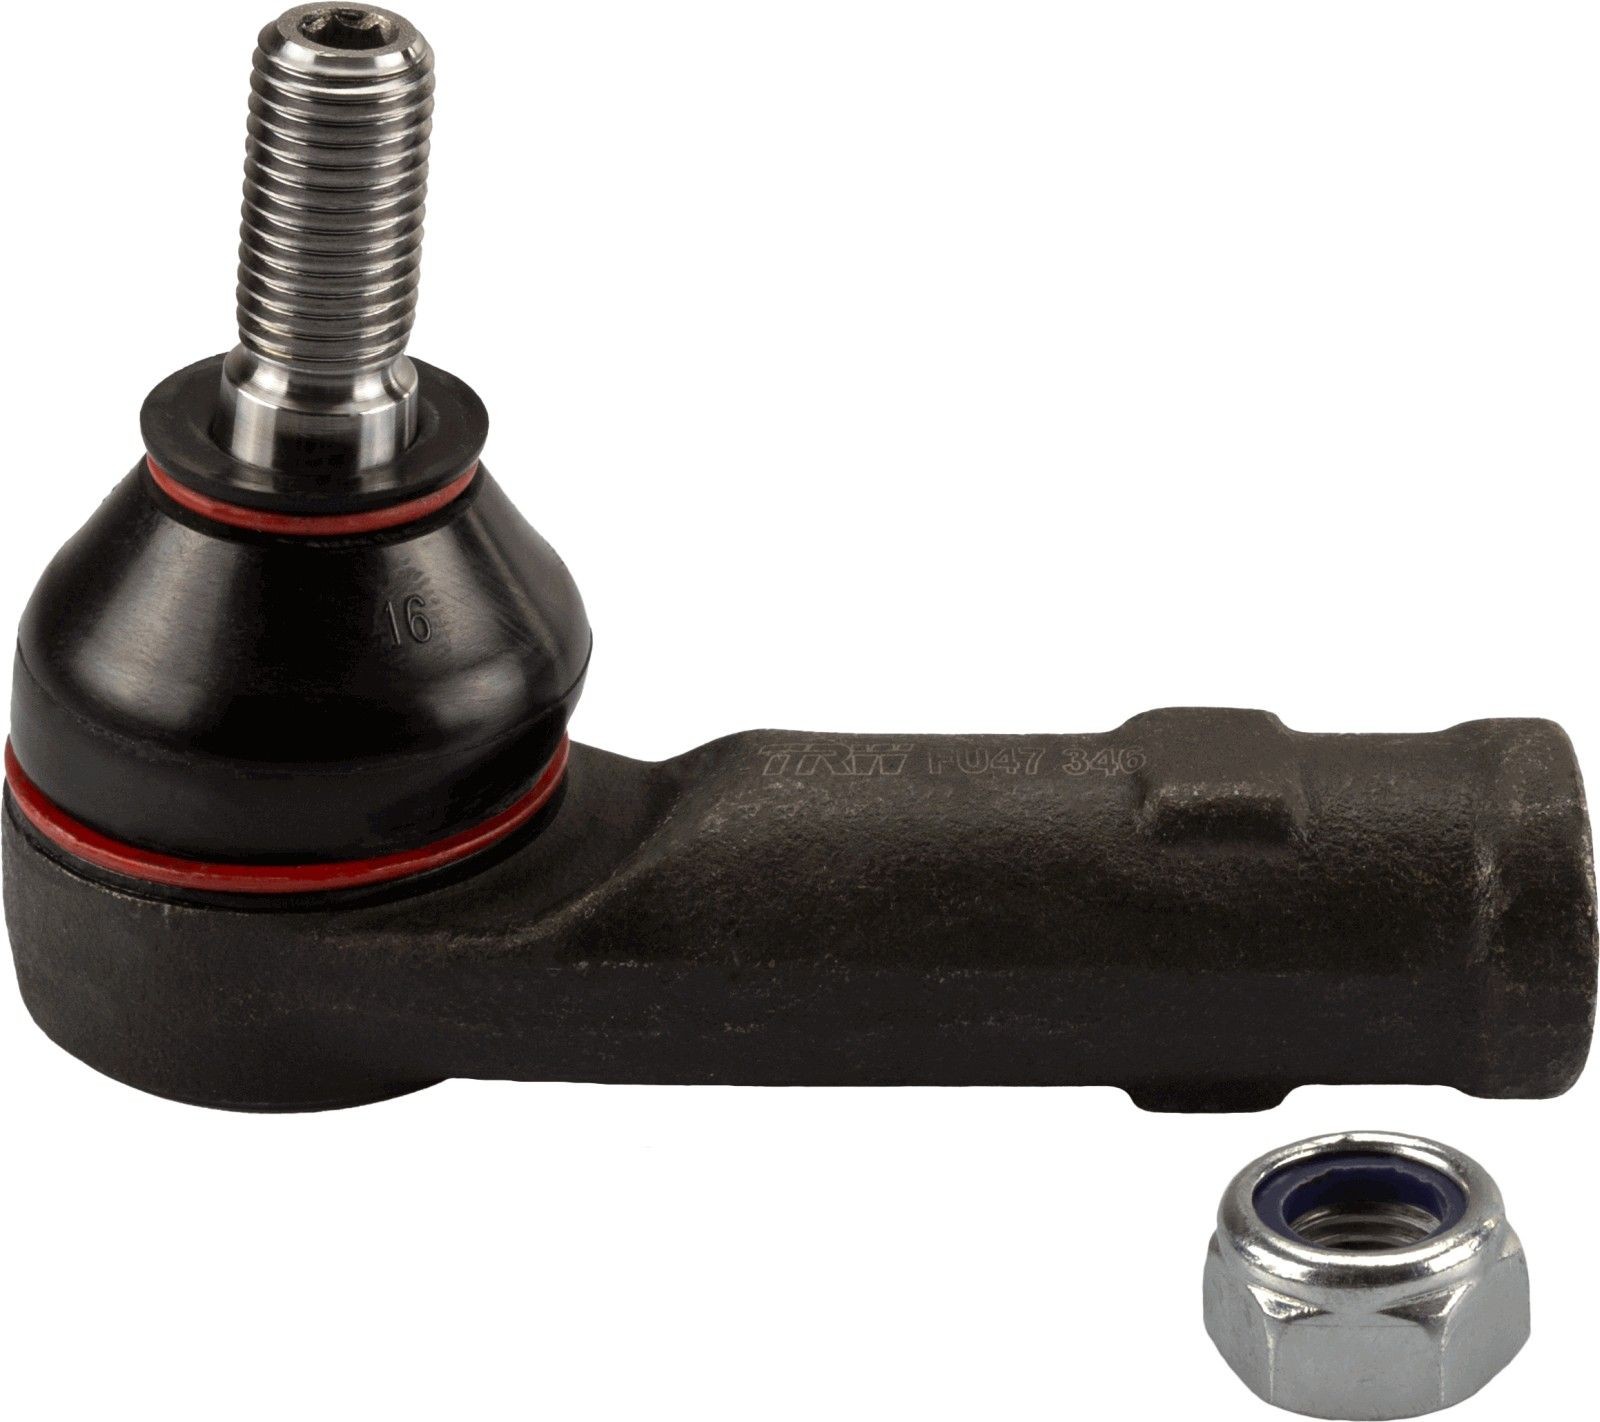 TRW JTE346 Track rod end Cone Size 14 mm, with accessories